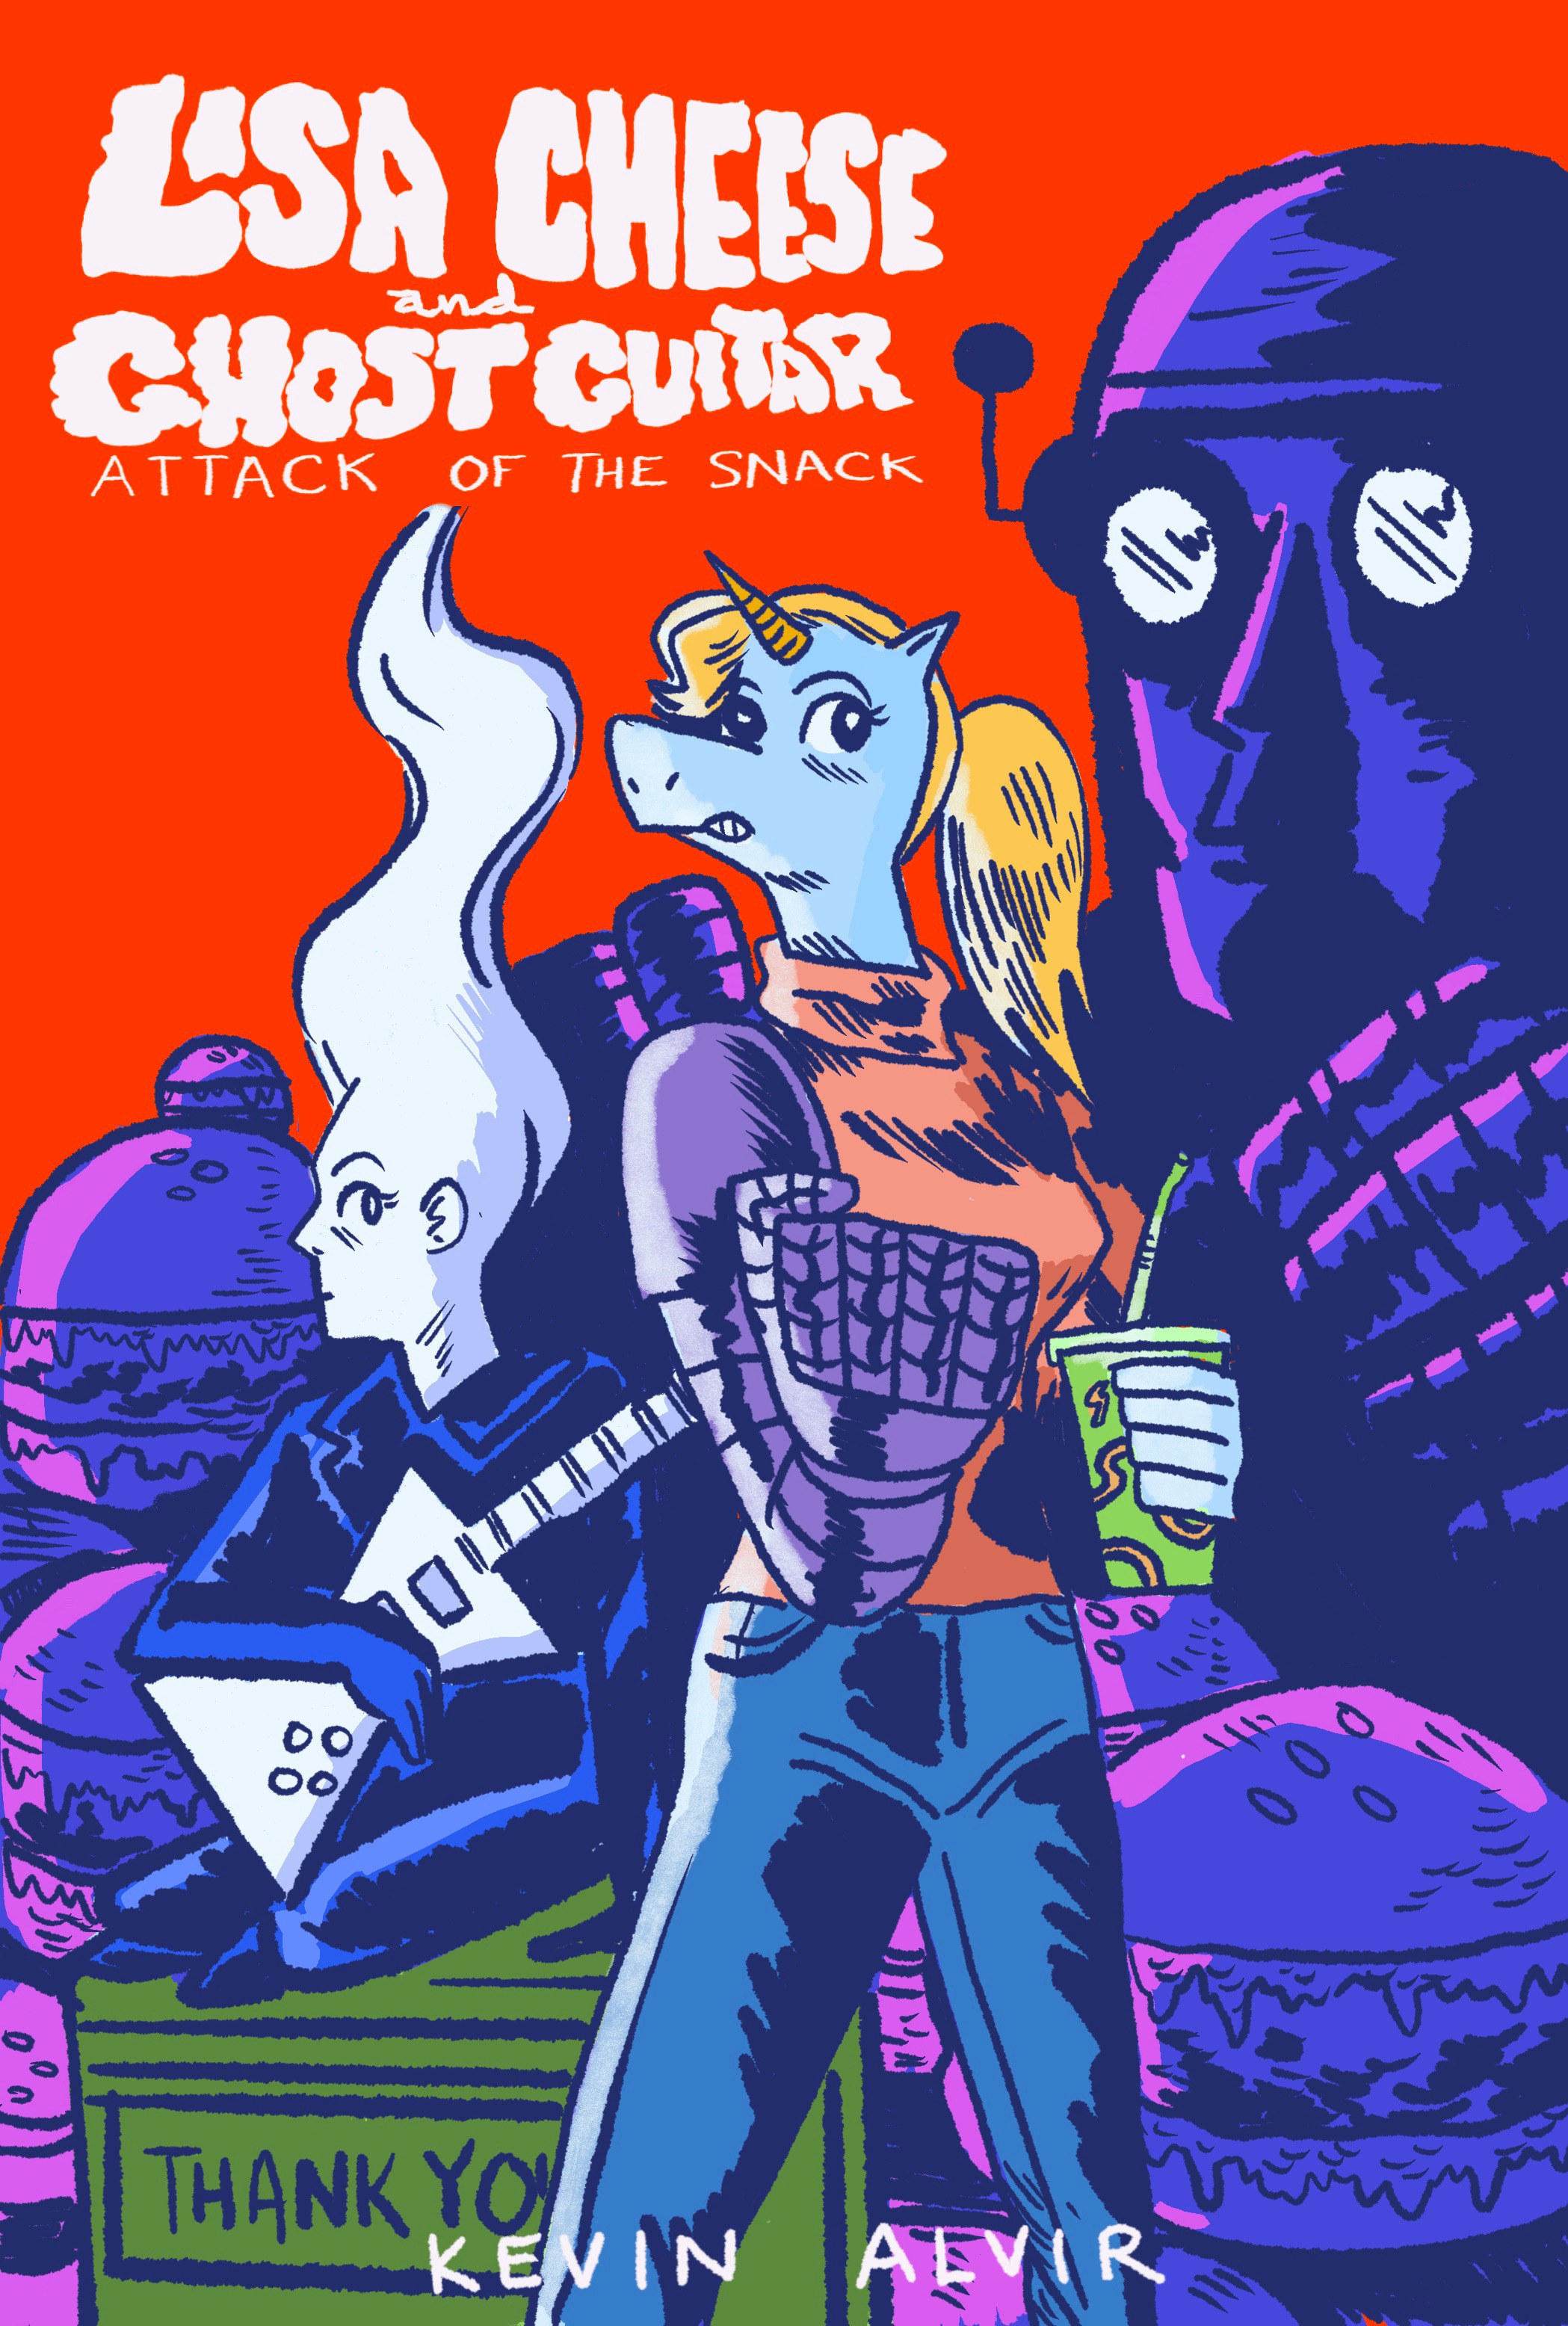 Lisa Cheese and Ghost Guitar (Book 1): Attack of the Snack | Alvir, Kevin (Auteur)